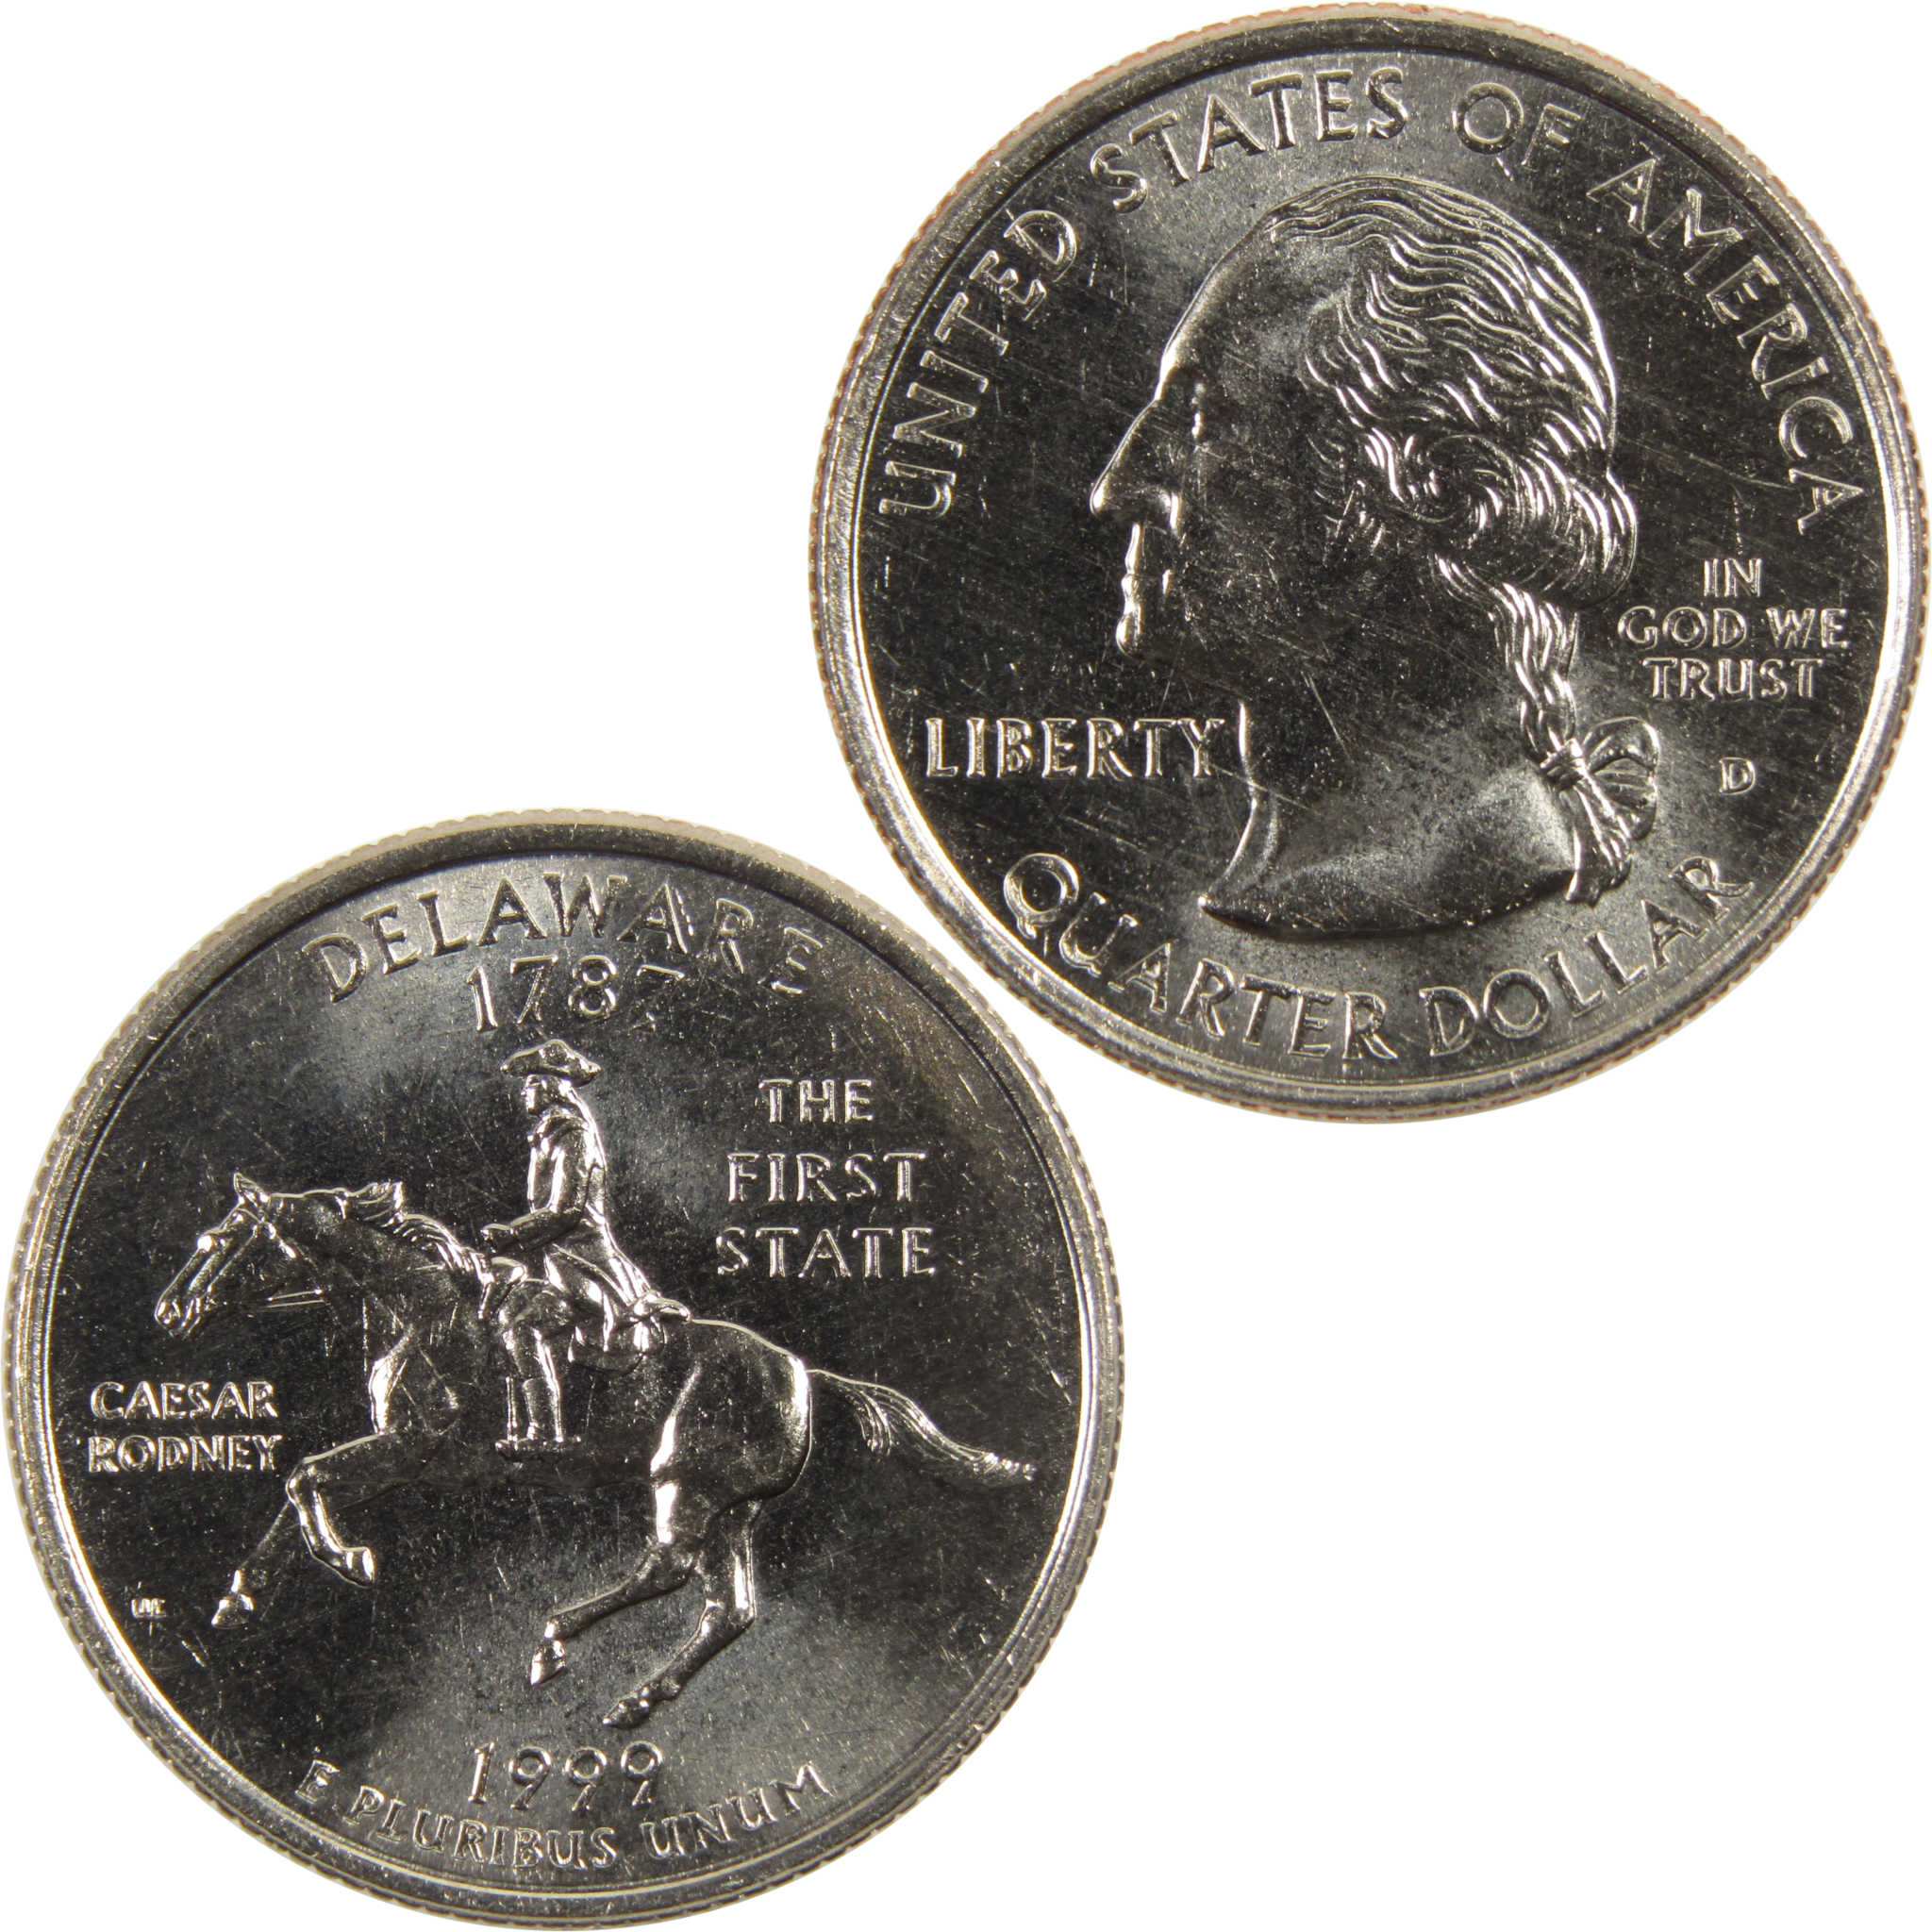 1999 D Delaware State Quarter BU Uncirculated Clad 25c Coin